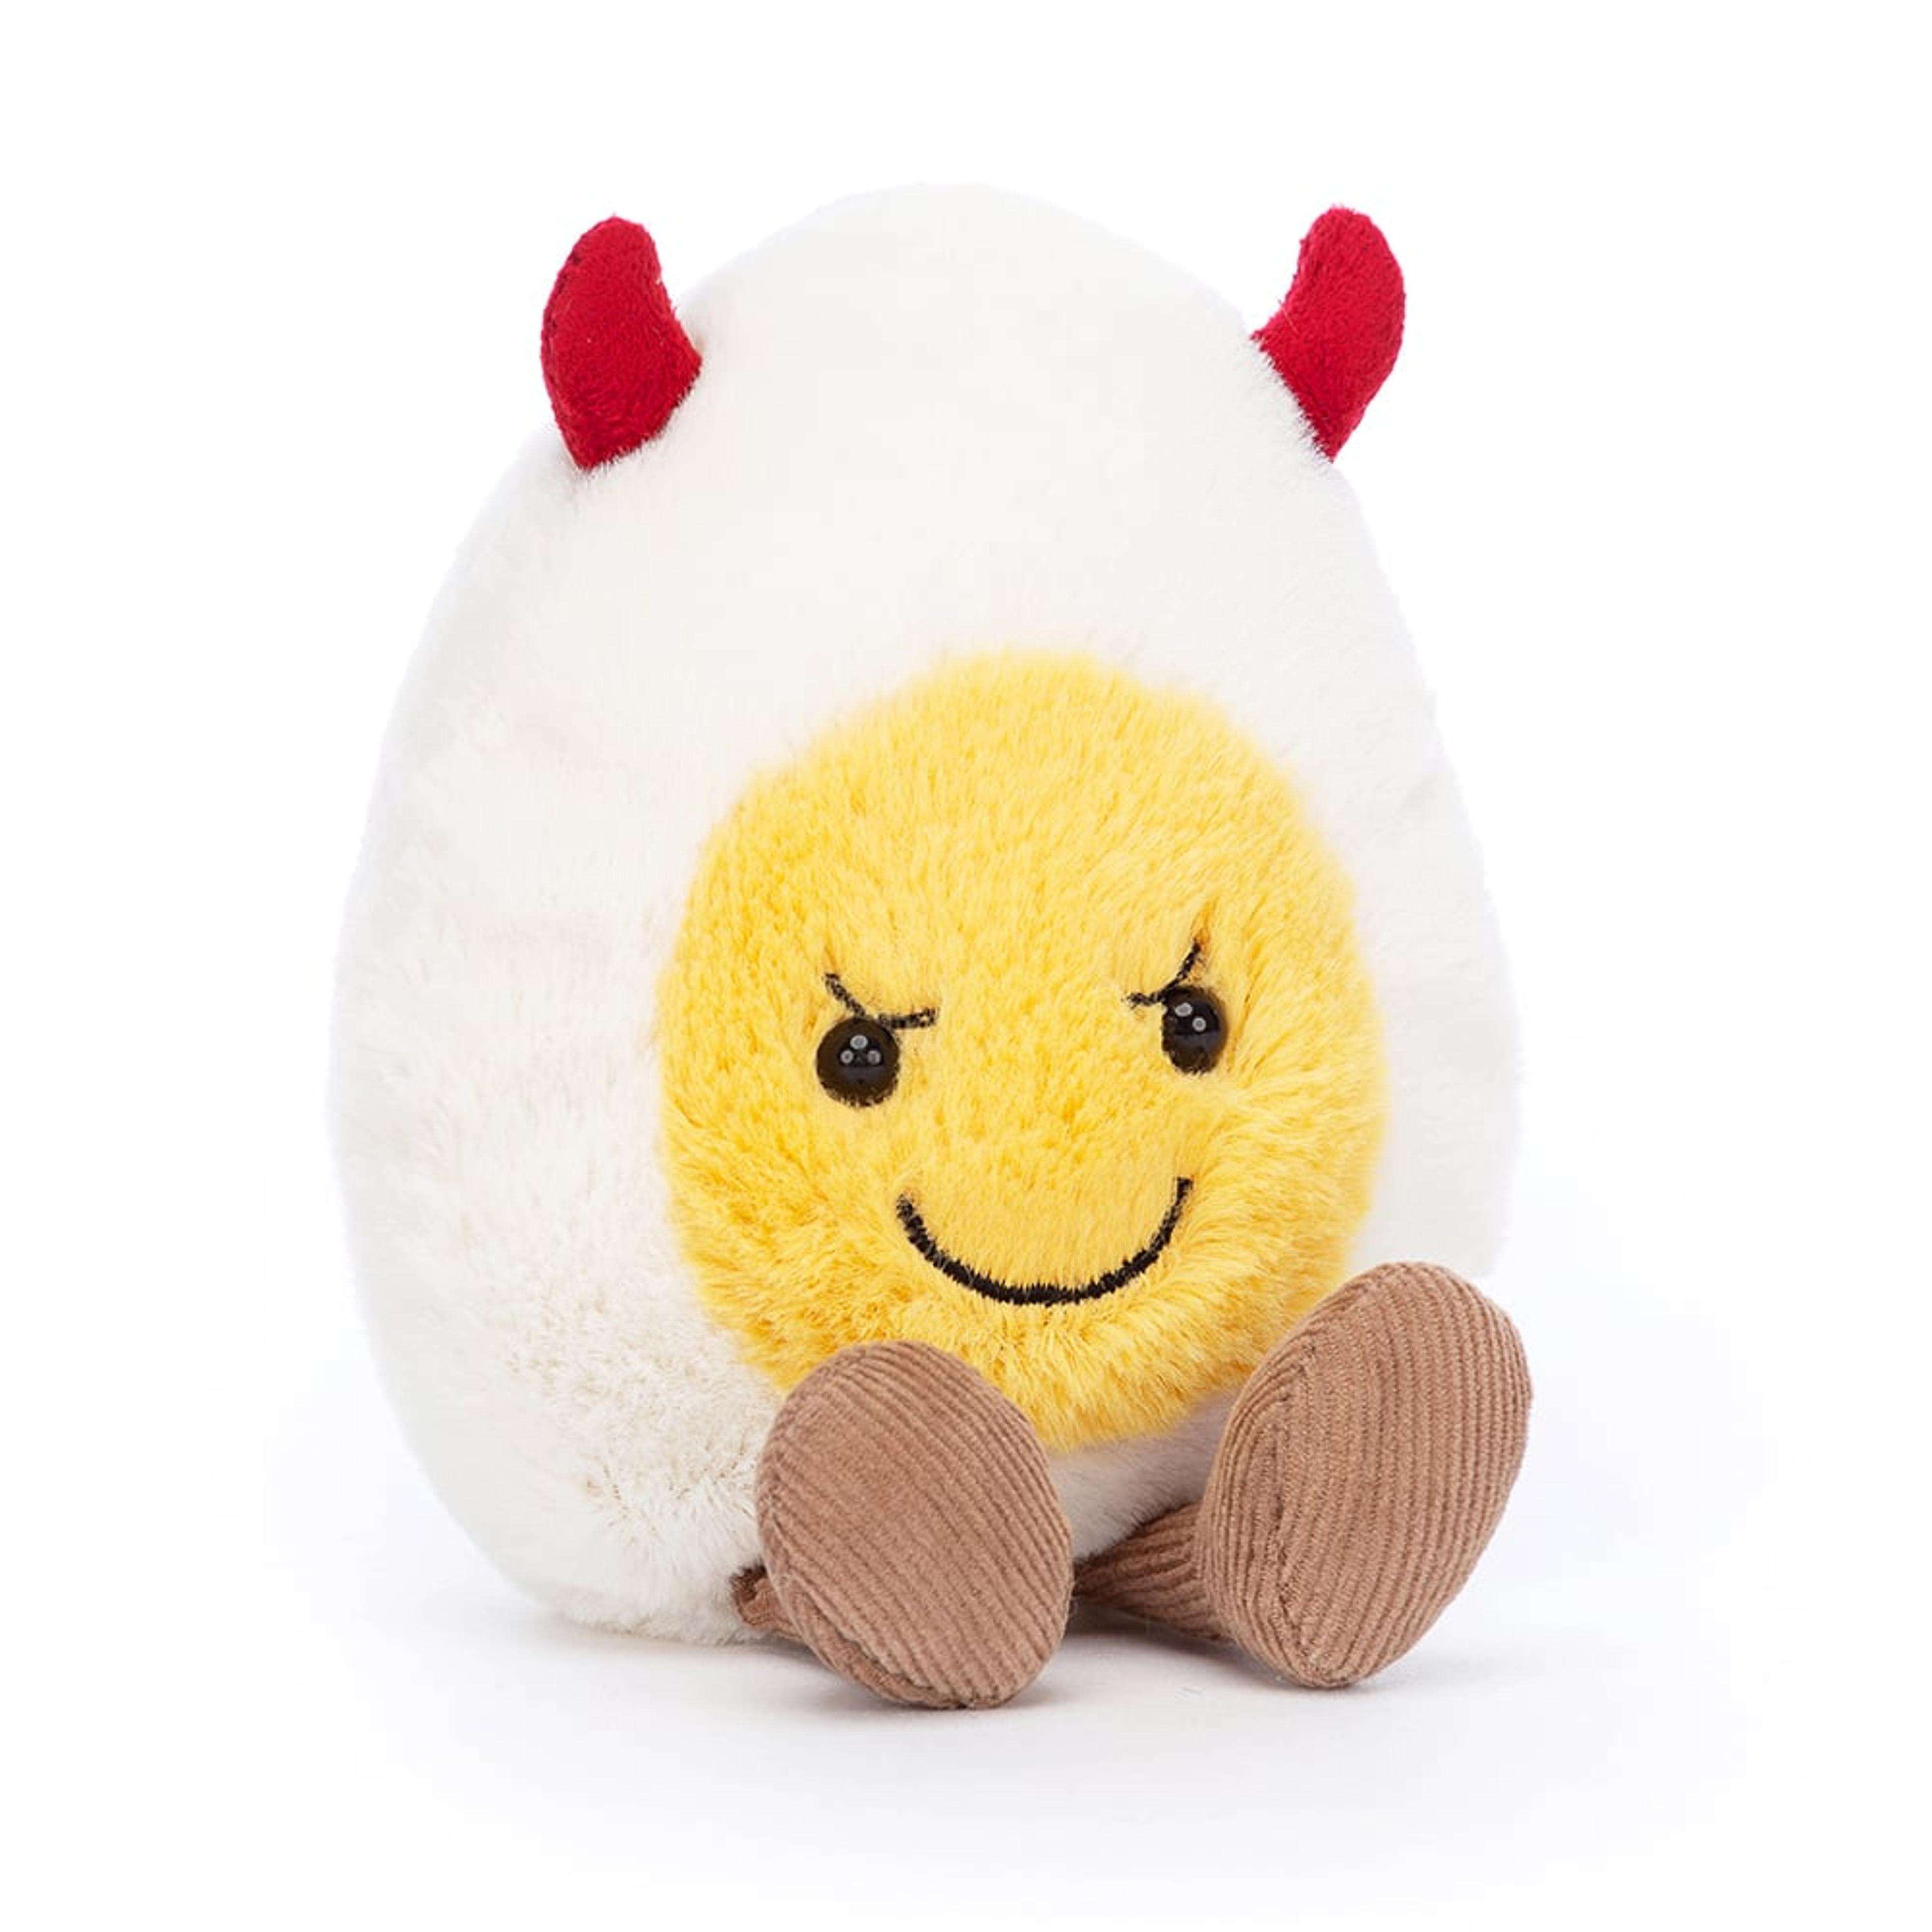 Buy Amuseable Happy Boiled Egg - at Jellycat.com